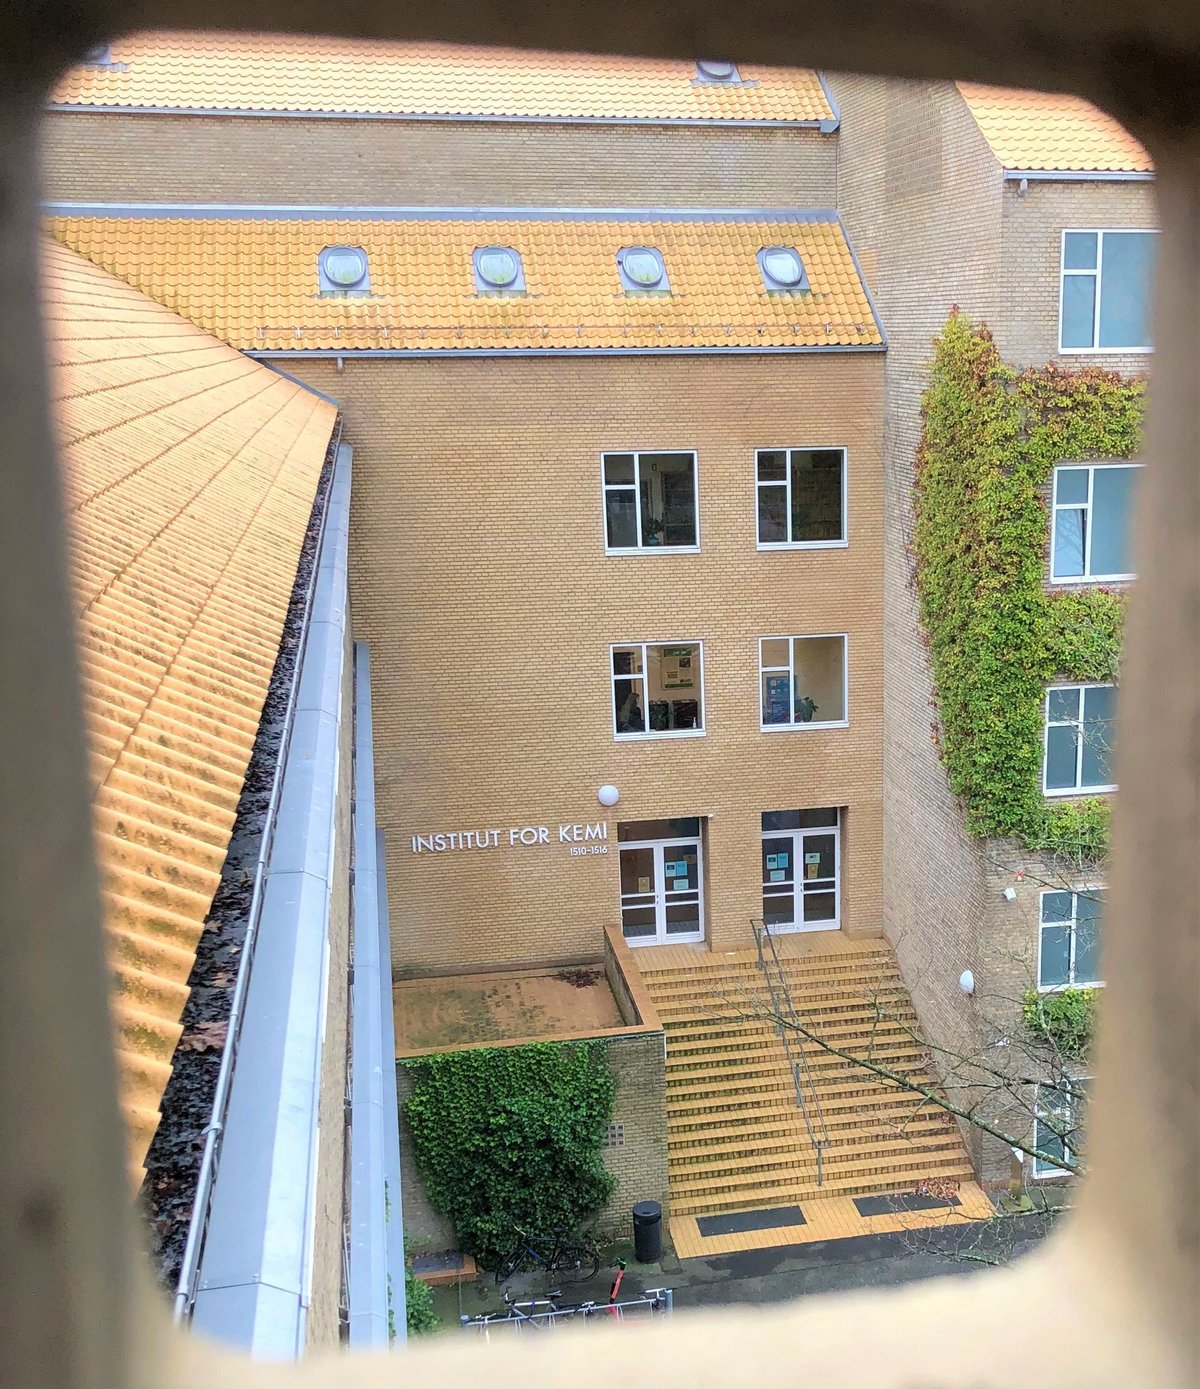 The department main entrance as seen from the ventilation system under the roof on the opposite building.